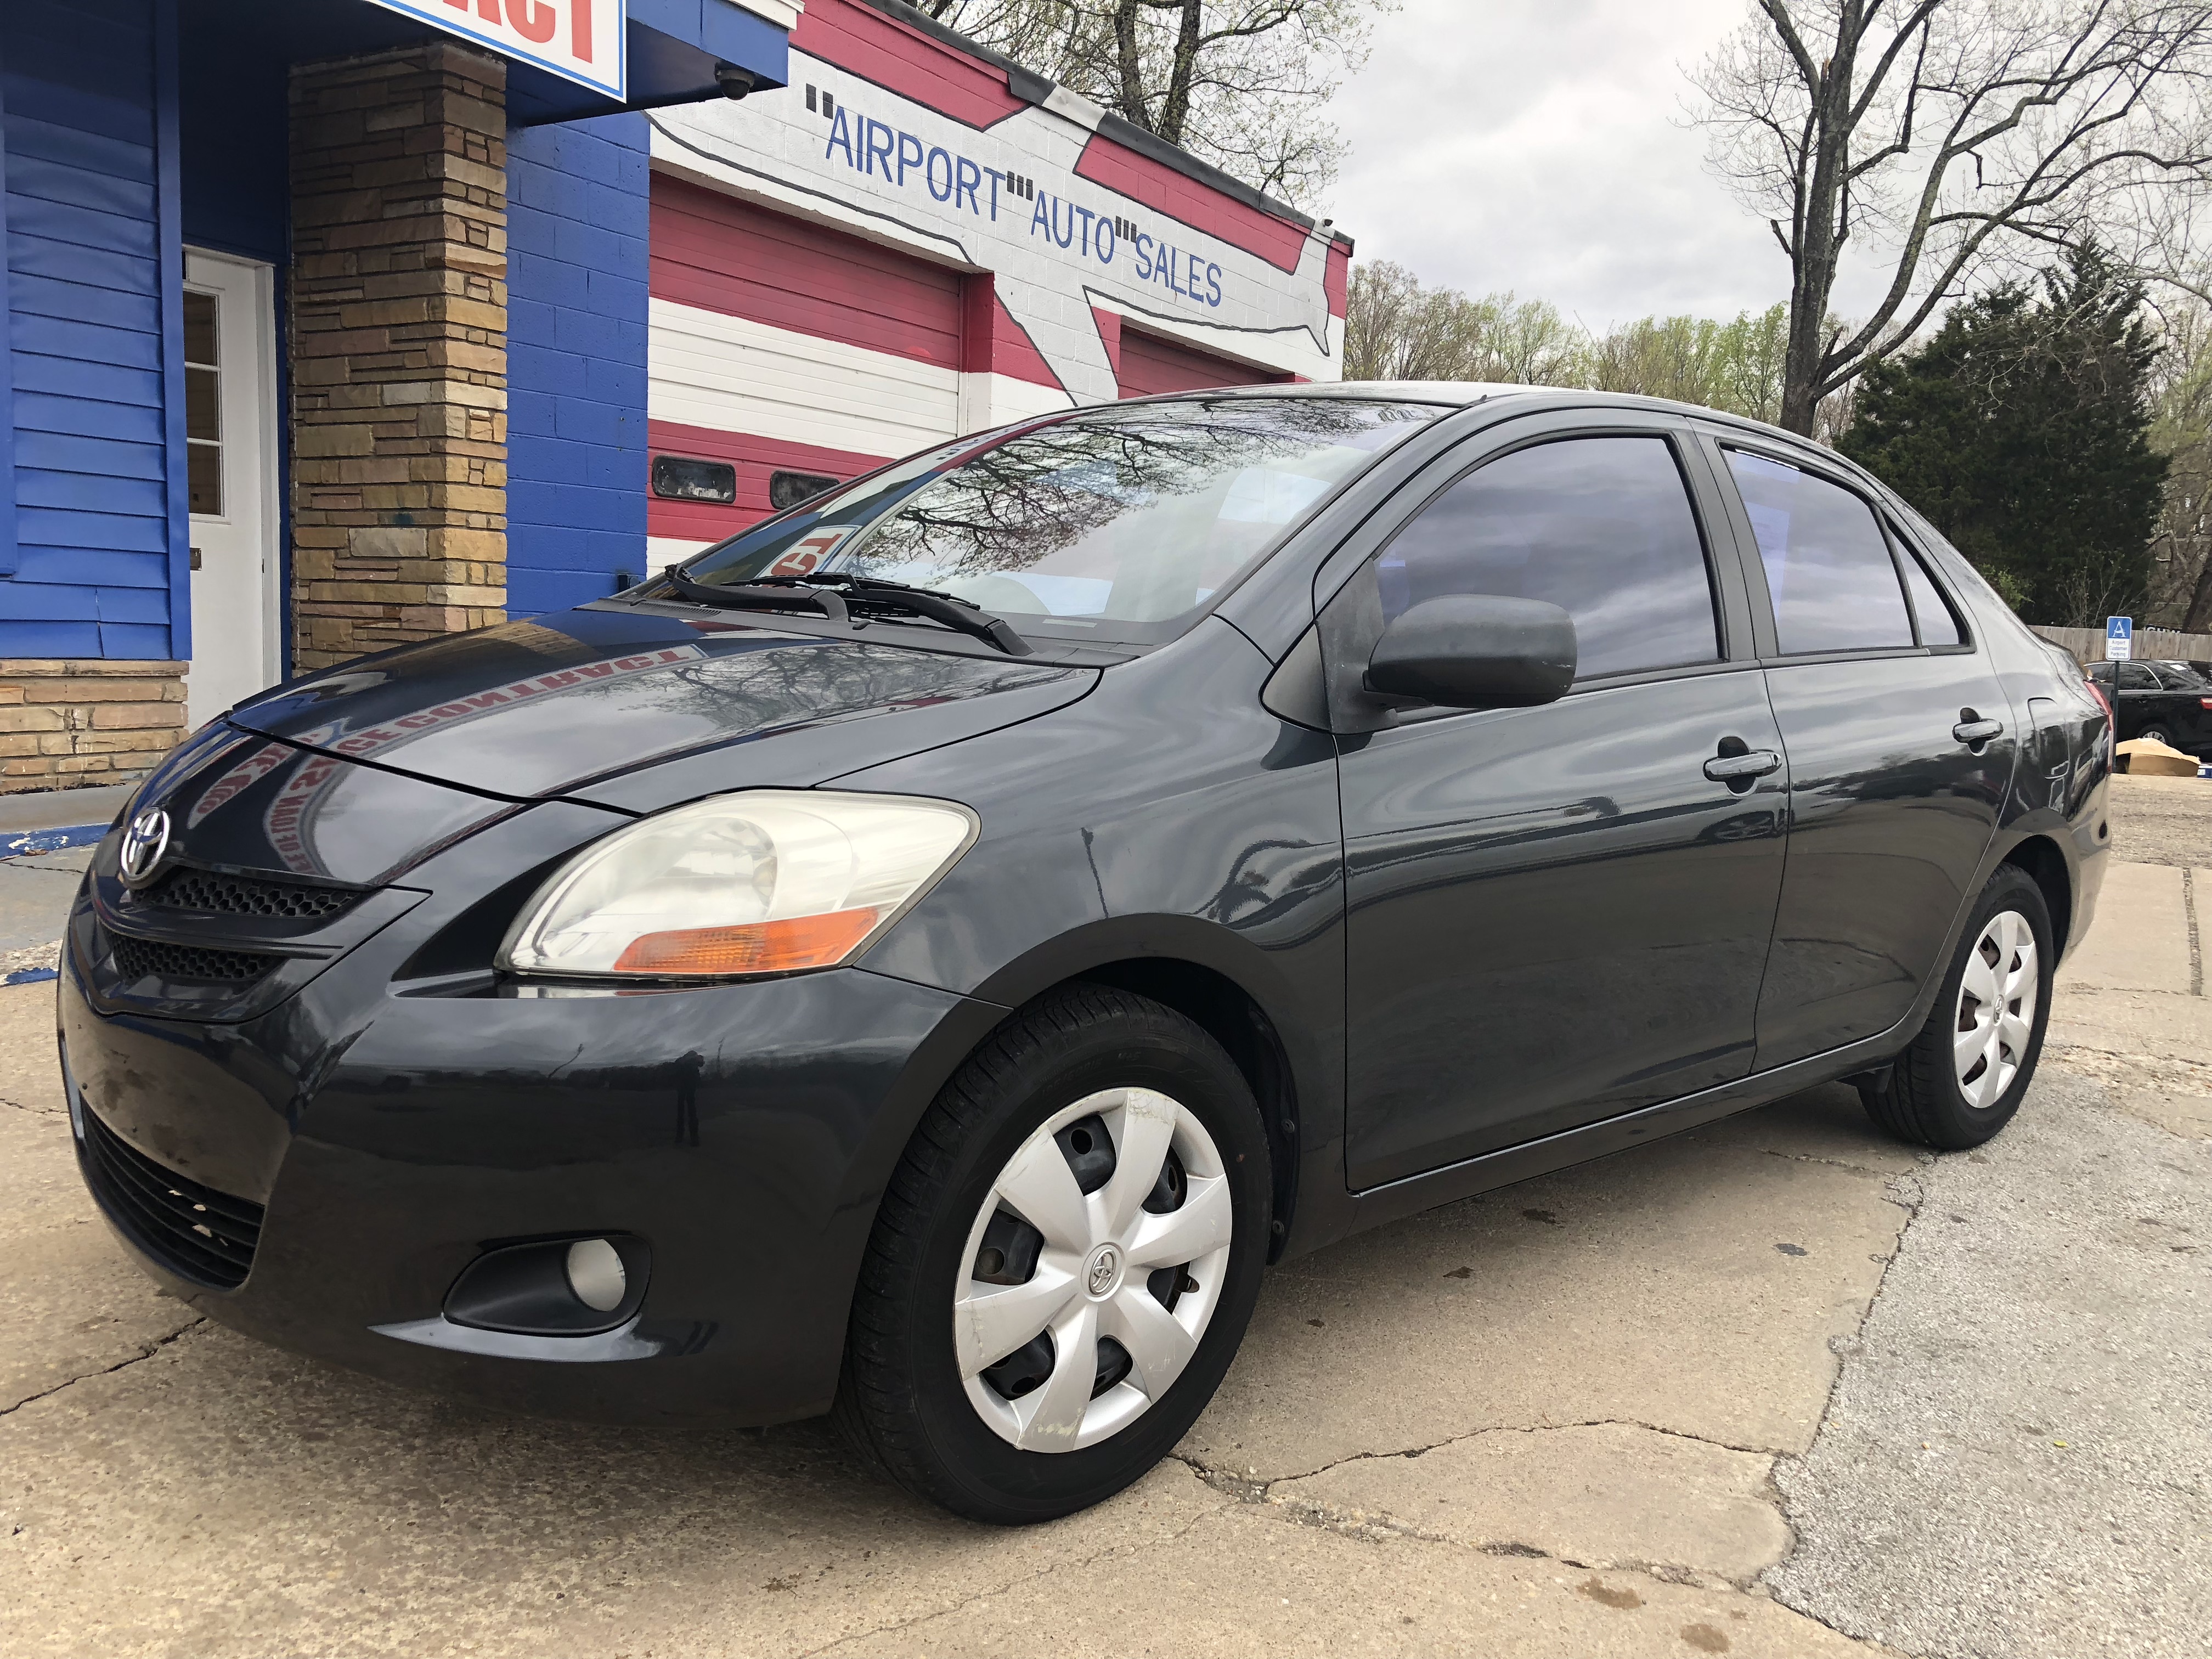 2007 Toyota Yaris, Airport Auto Sales Used Cars for Sale